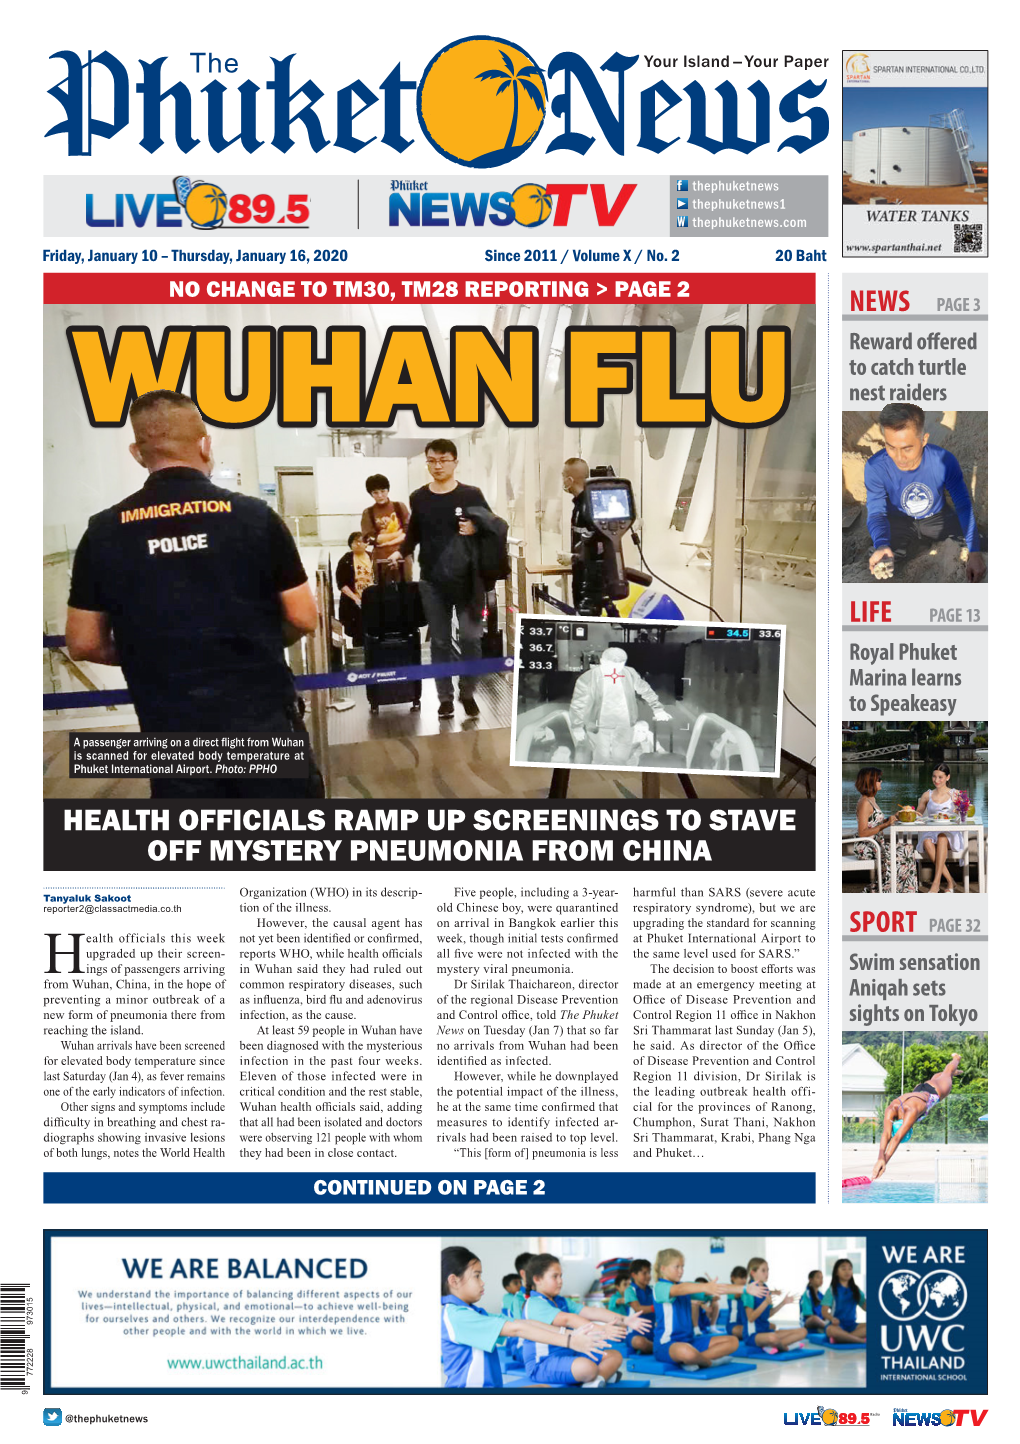 News Life Sport Health Officials Ramp up Screenings to Stave Off Mystery Pneumonia from China